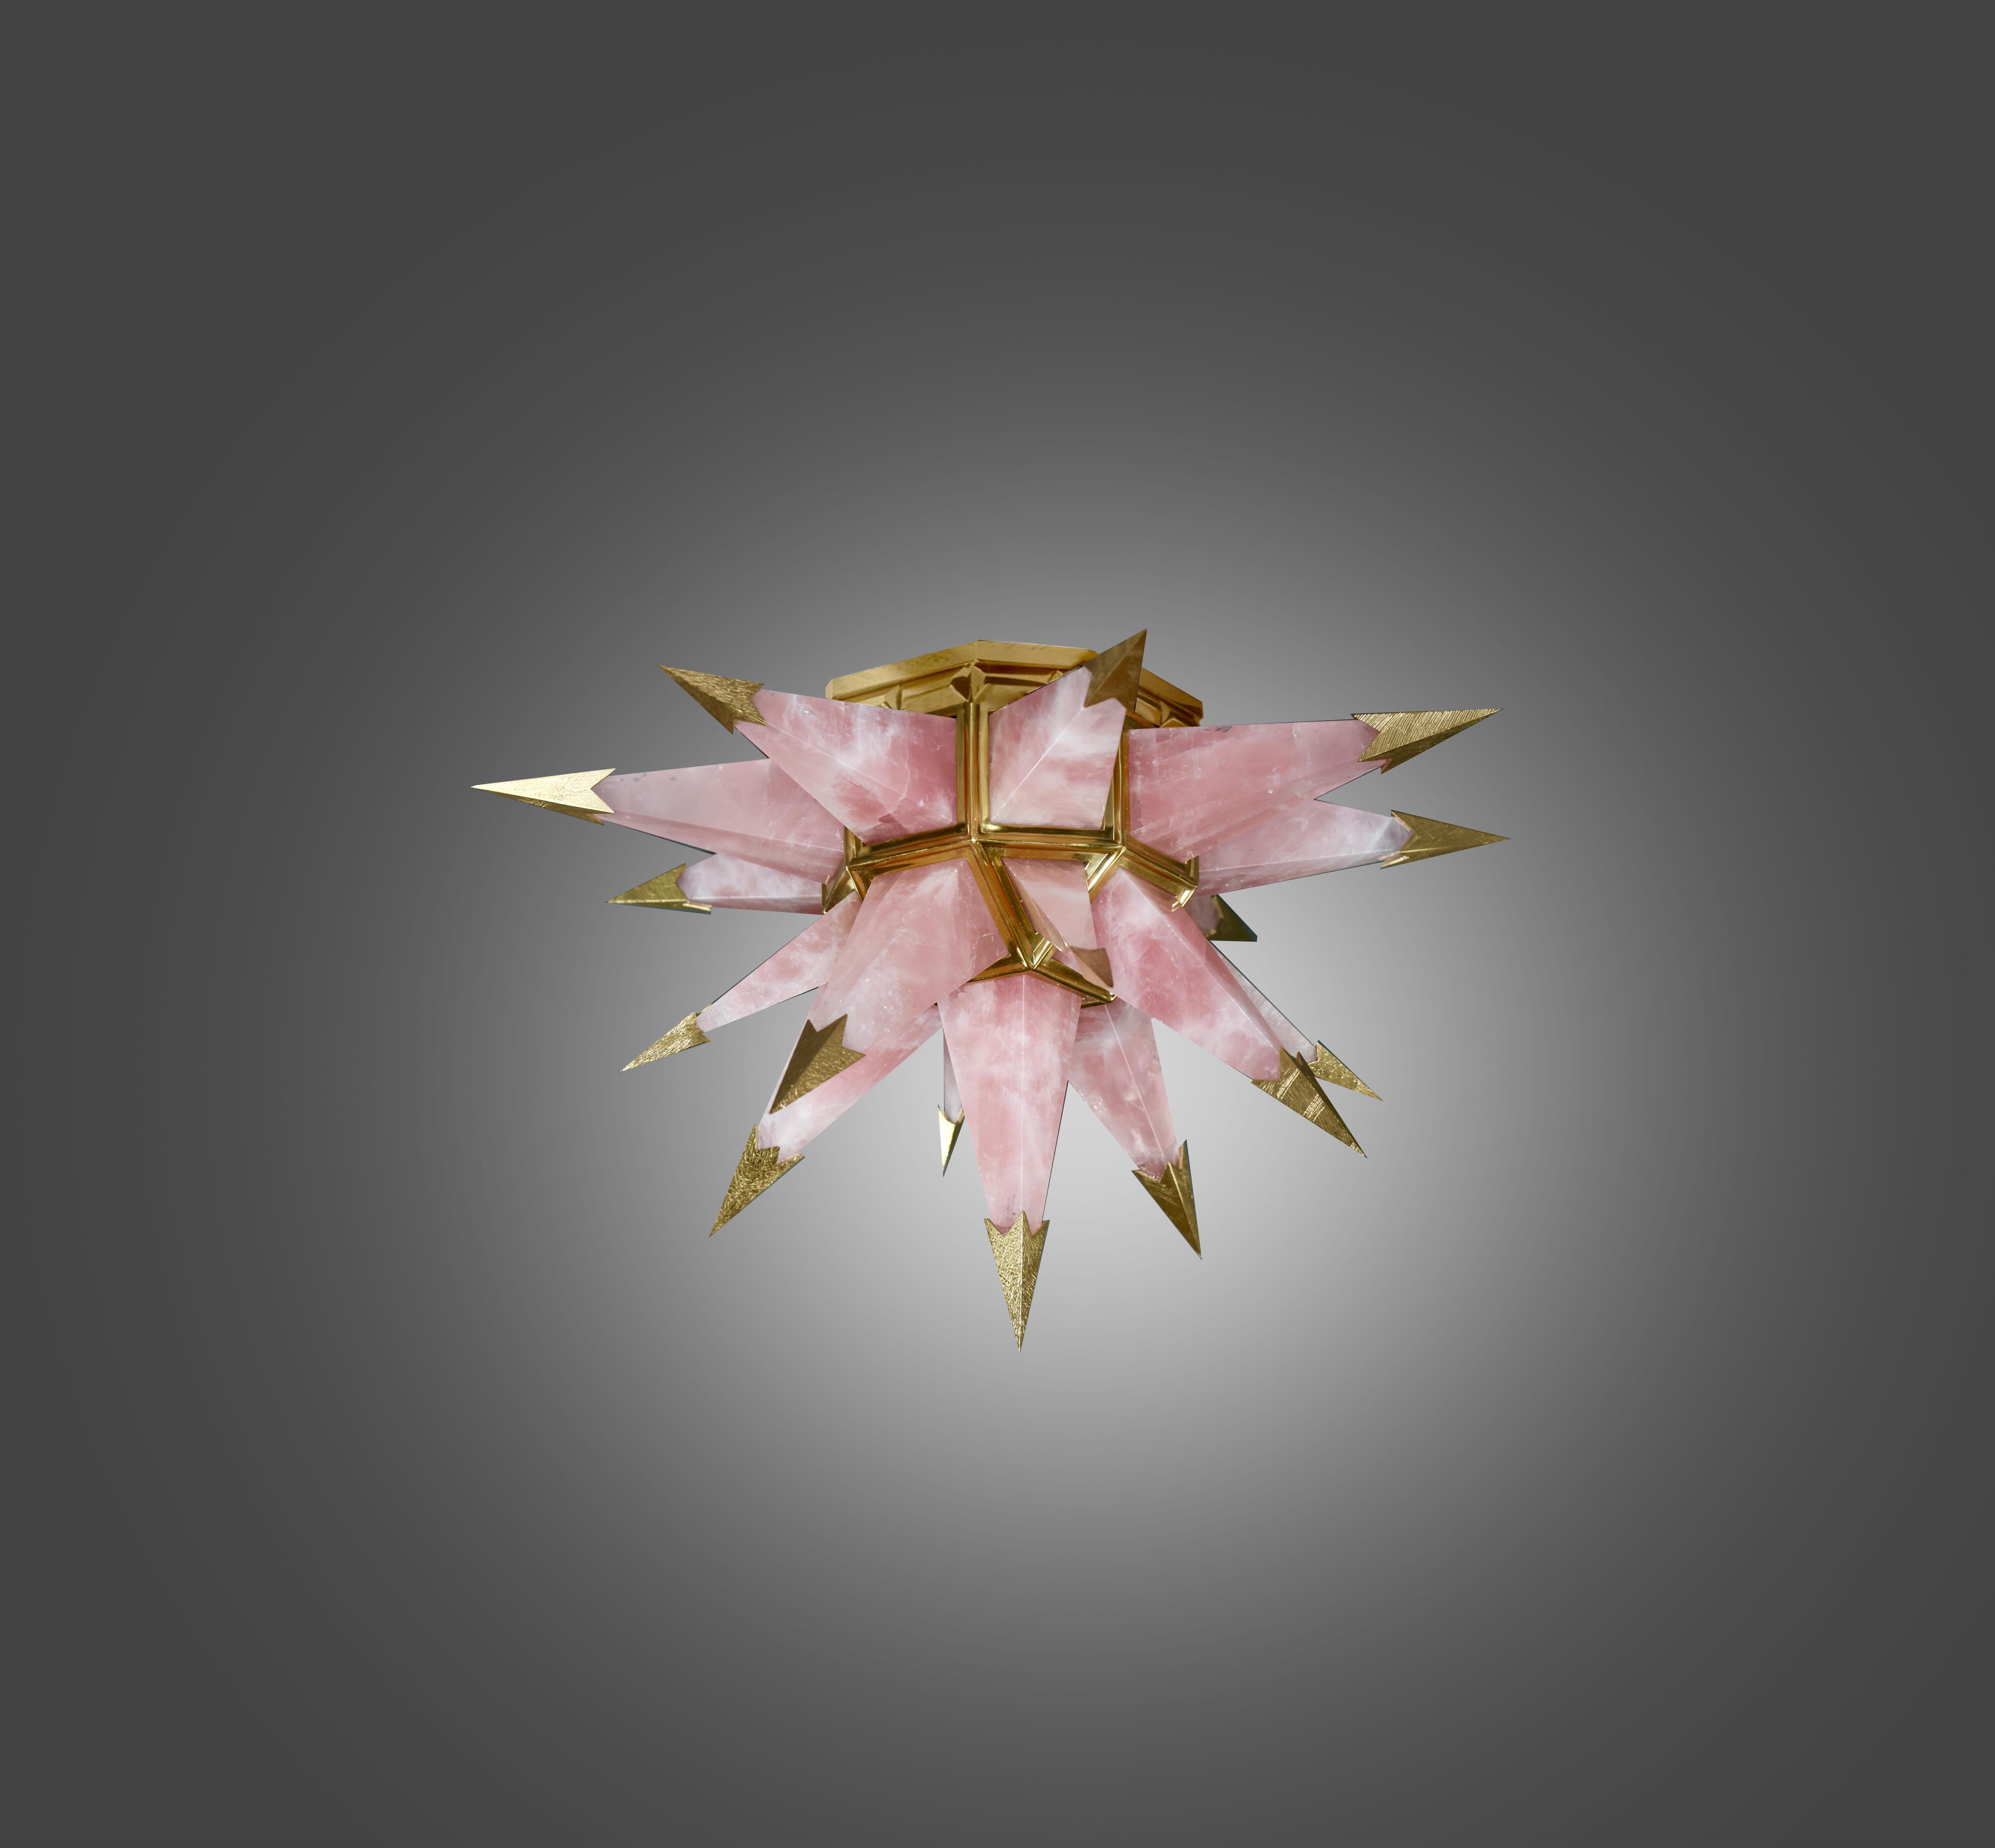 Star form pink rock crystal flush mount with polish brass frame and tip. Created by Phoenix Gallery, NYC. 
Installed two sockets, use 2 candelabra lightbulbs, 160w total

Custom size, quantity, and finish upon request.